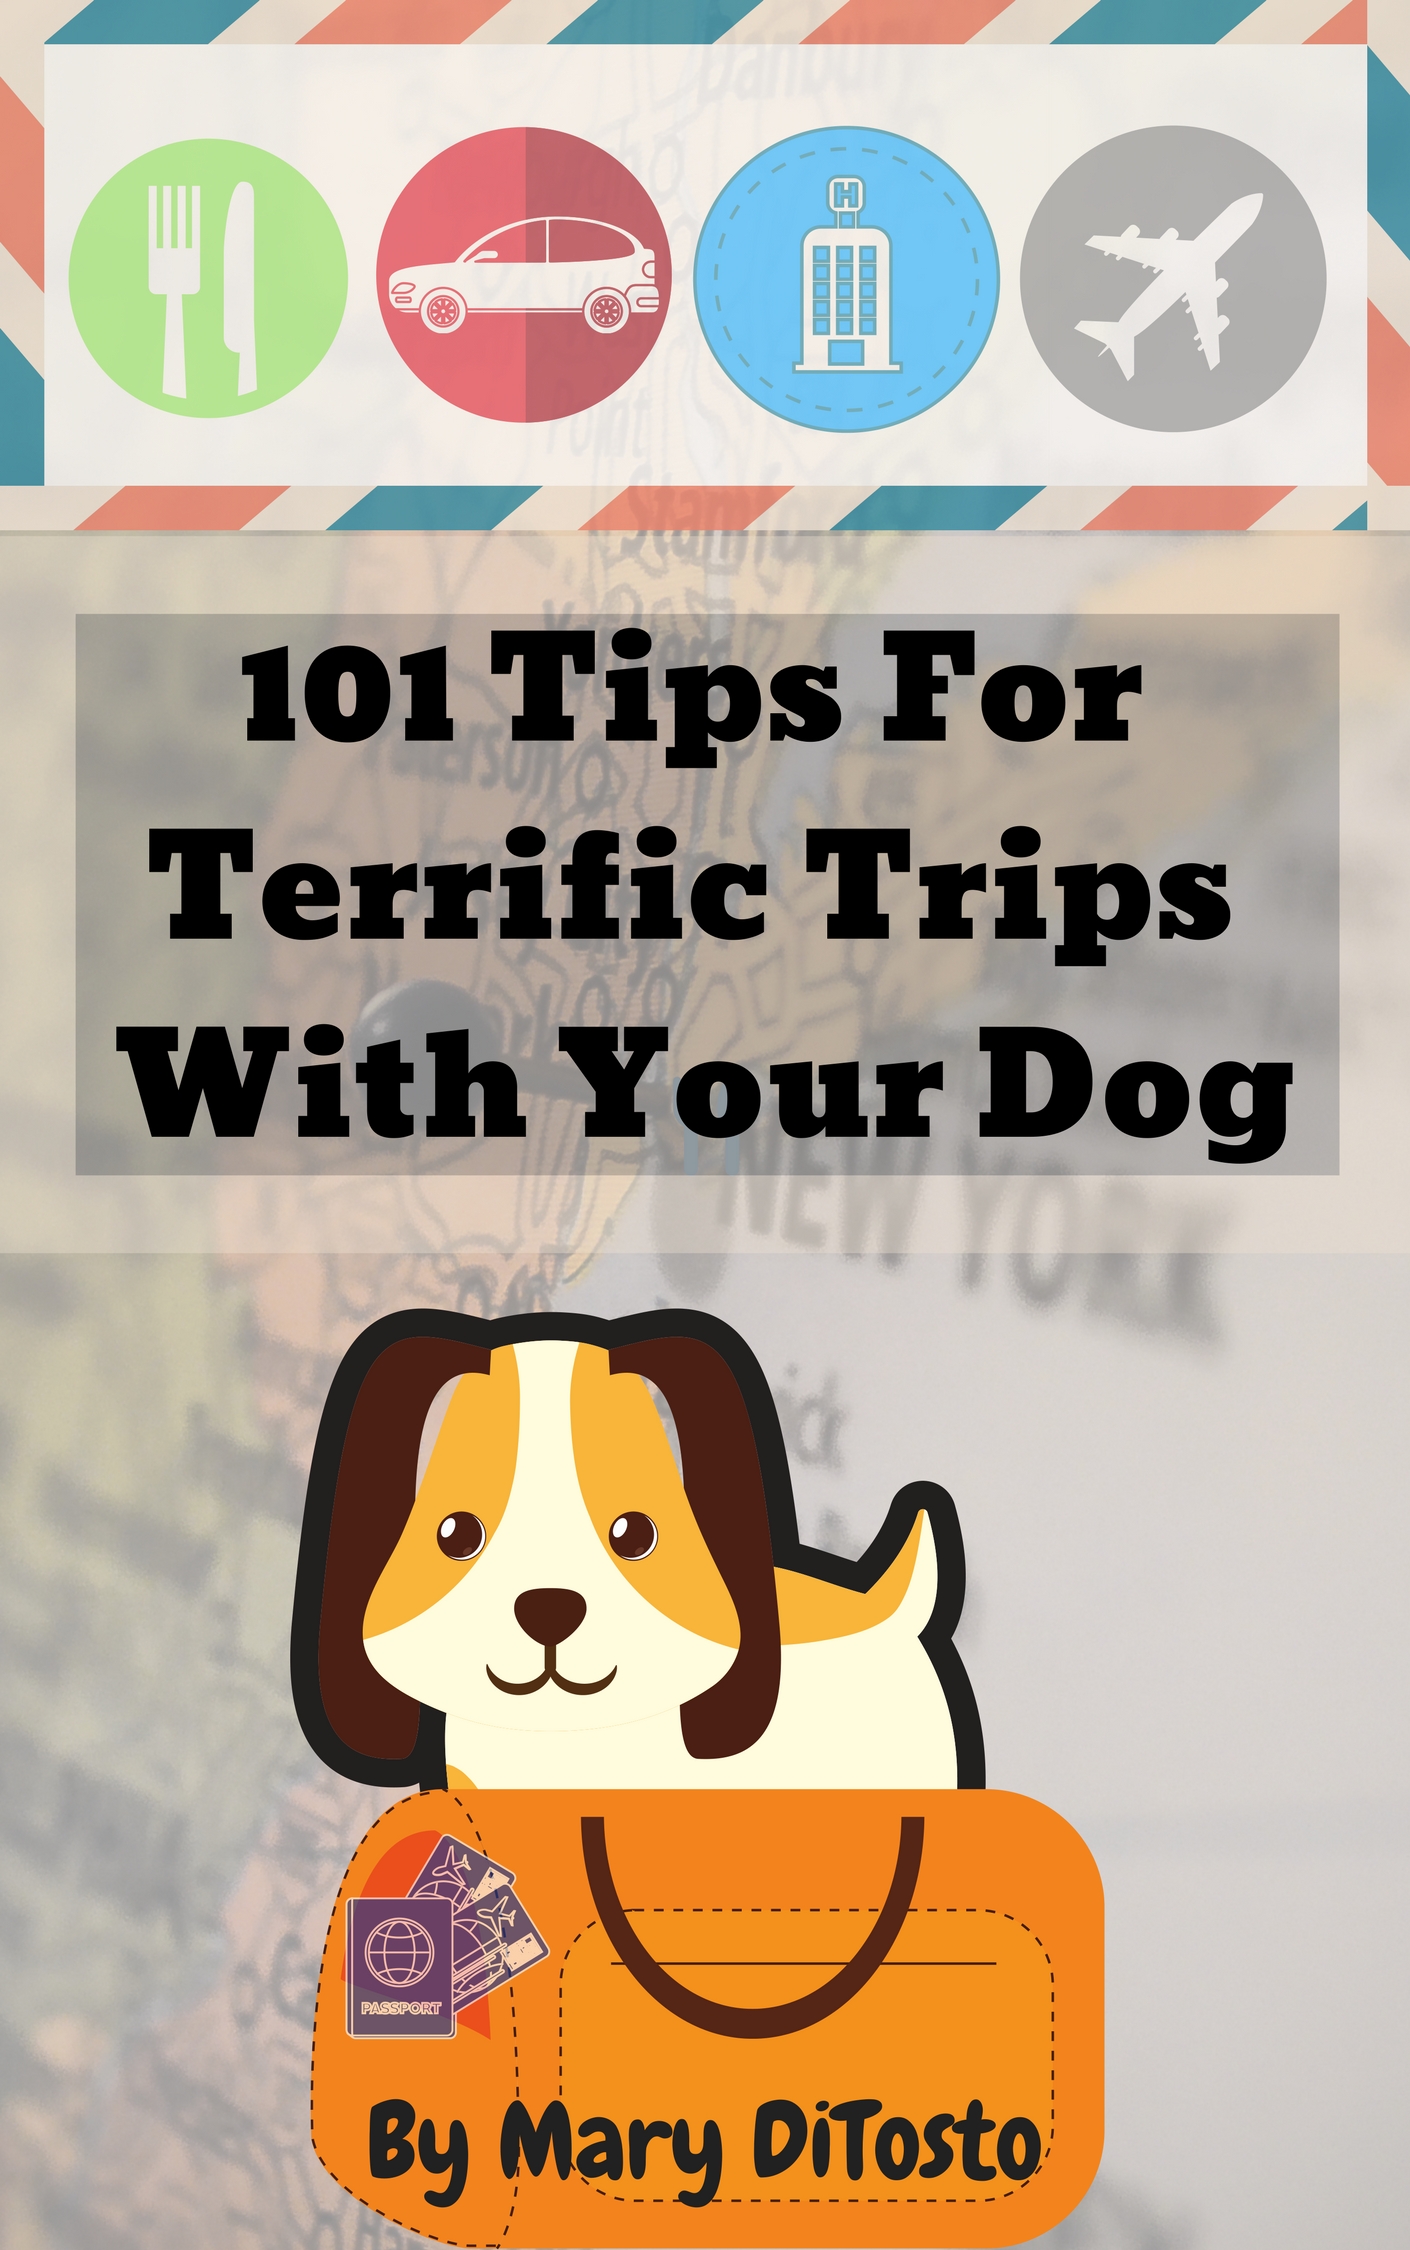 http://www.yourdesignerdogblog.com/wp-content/uploads/2018/06/101-Tips-for-Terrific-Trips-with-your-Dog.jpg